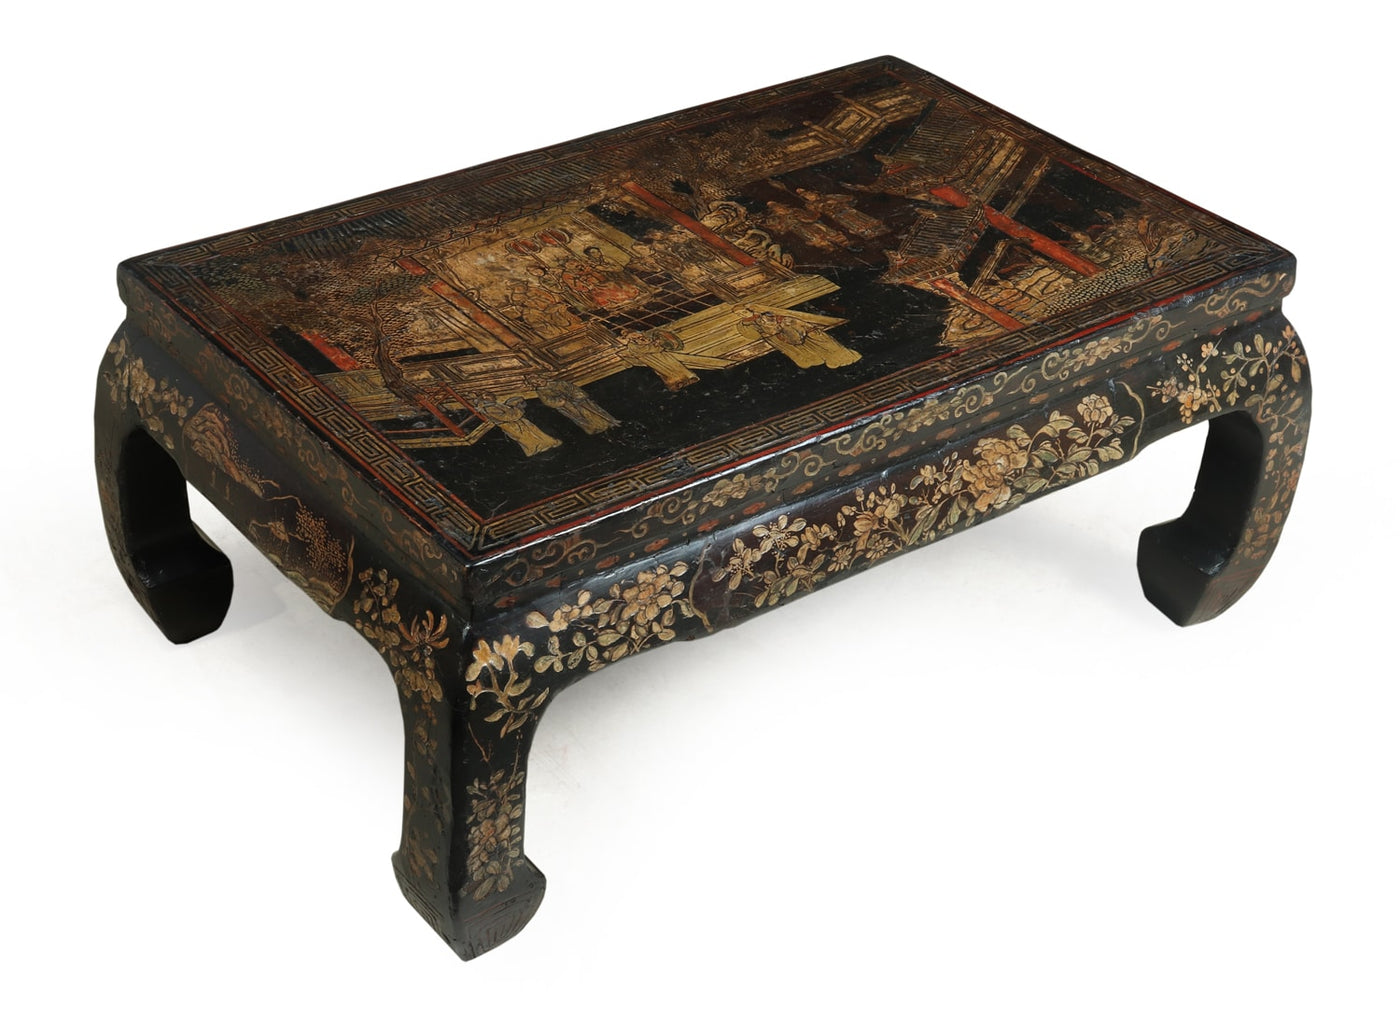 Chinoiserie Kang Table late 17th century